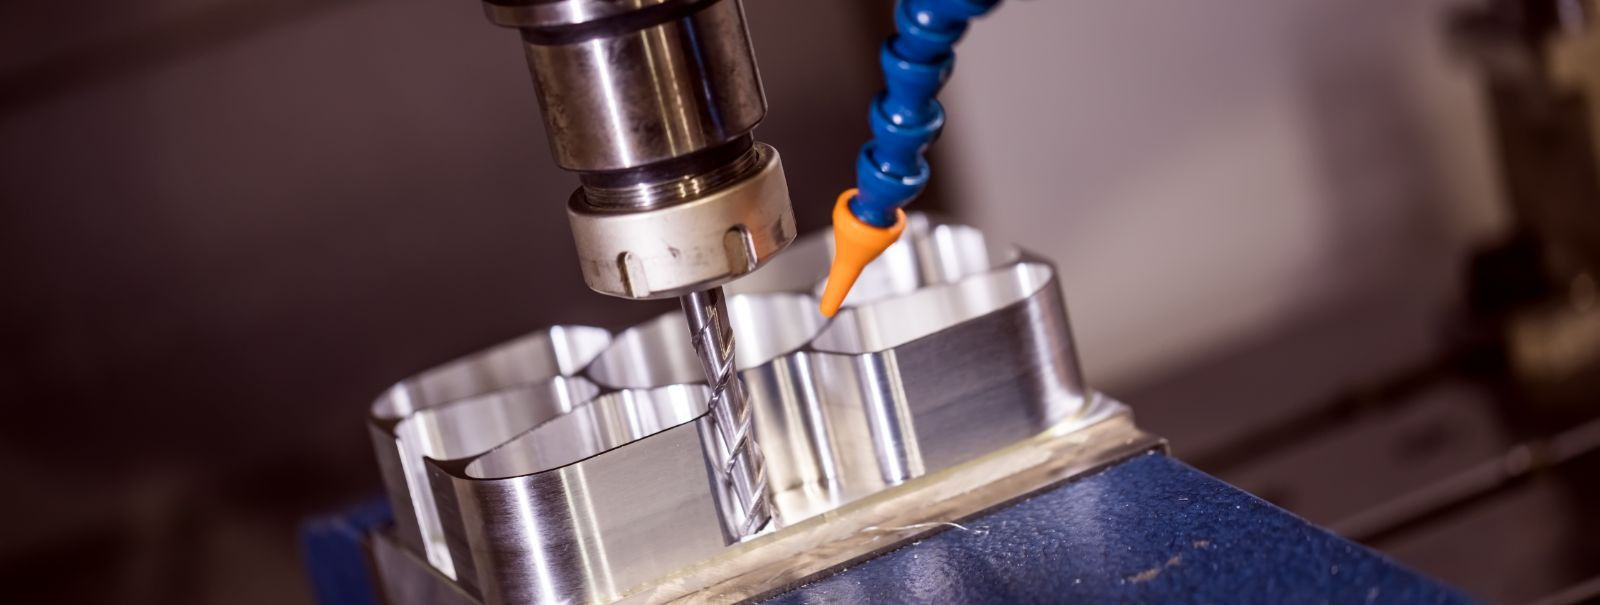 CNC (Computer Numerical Control) milling is a subtractive manufacturing process that uses computer-controlled machine tools to remove material from a solid bloc